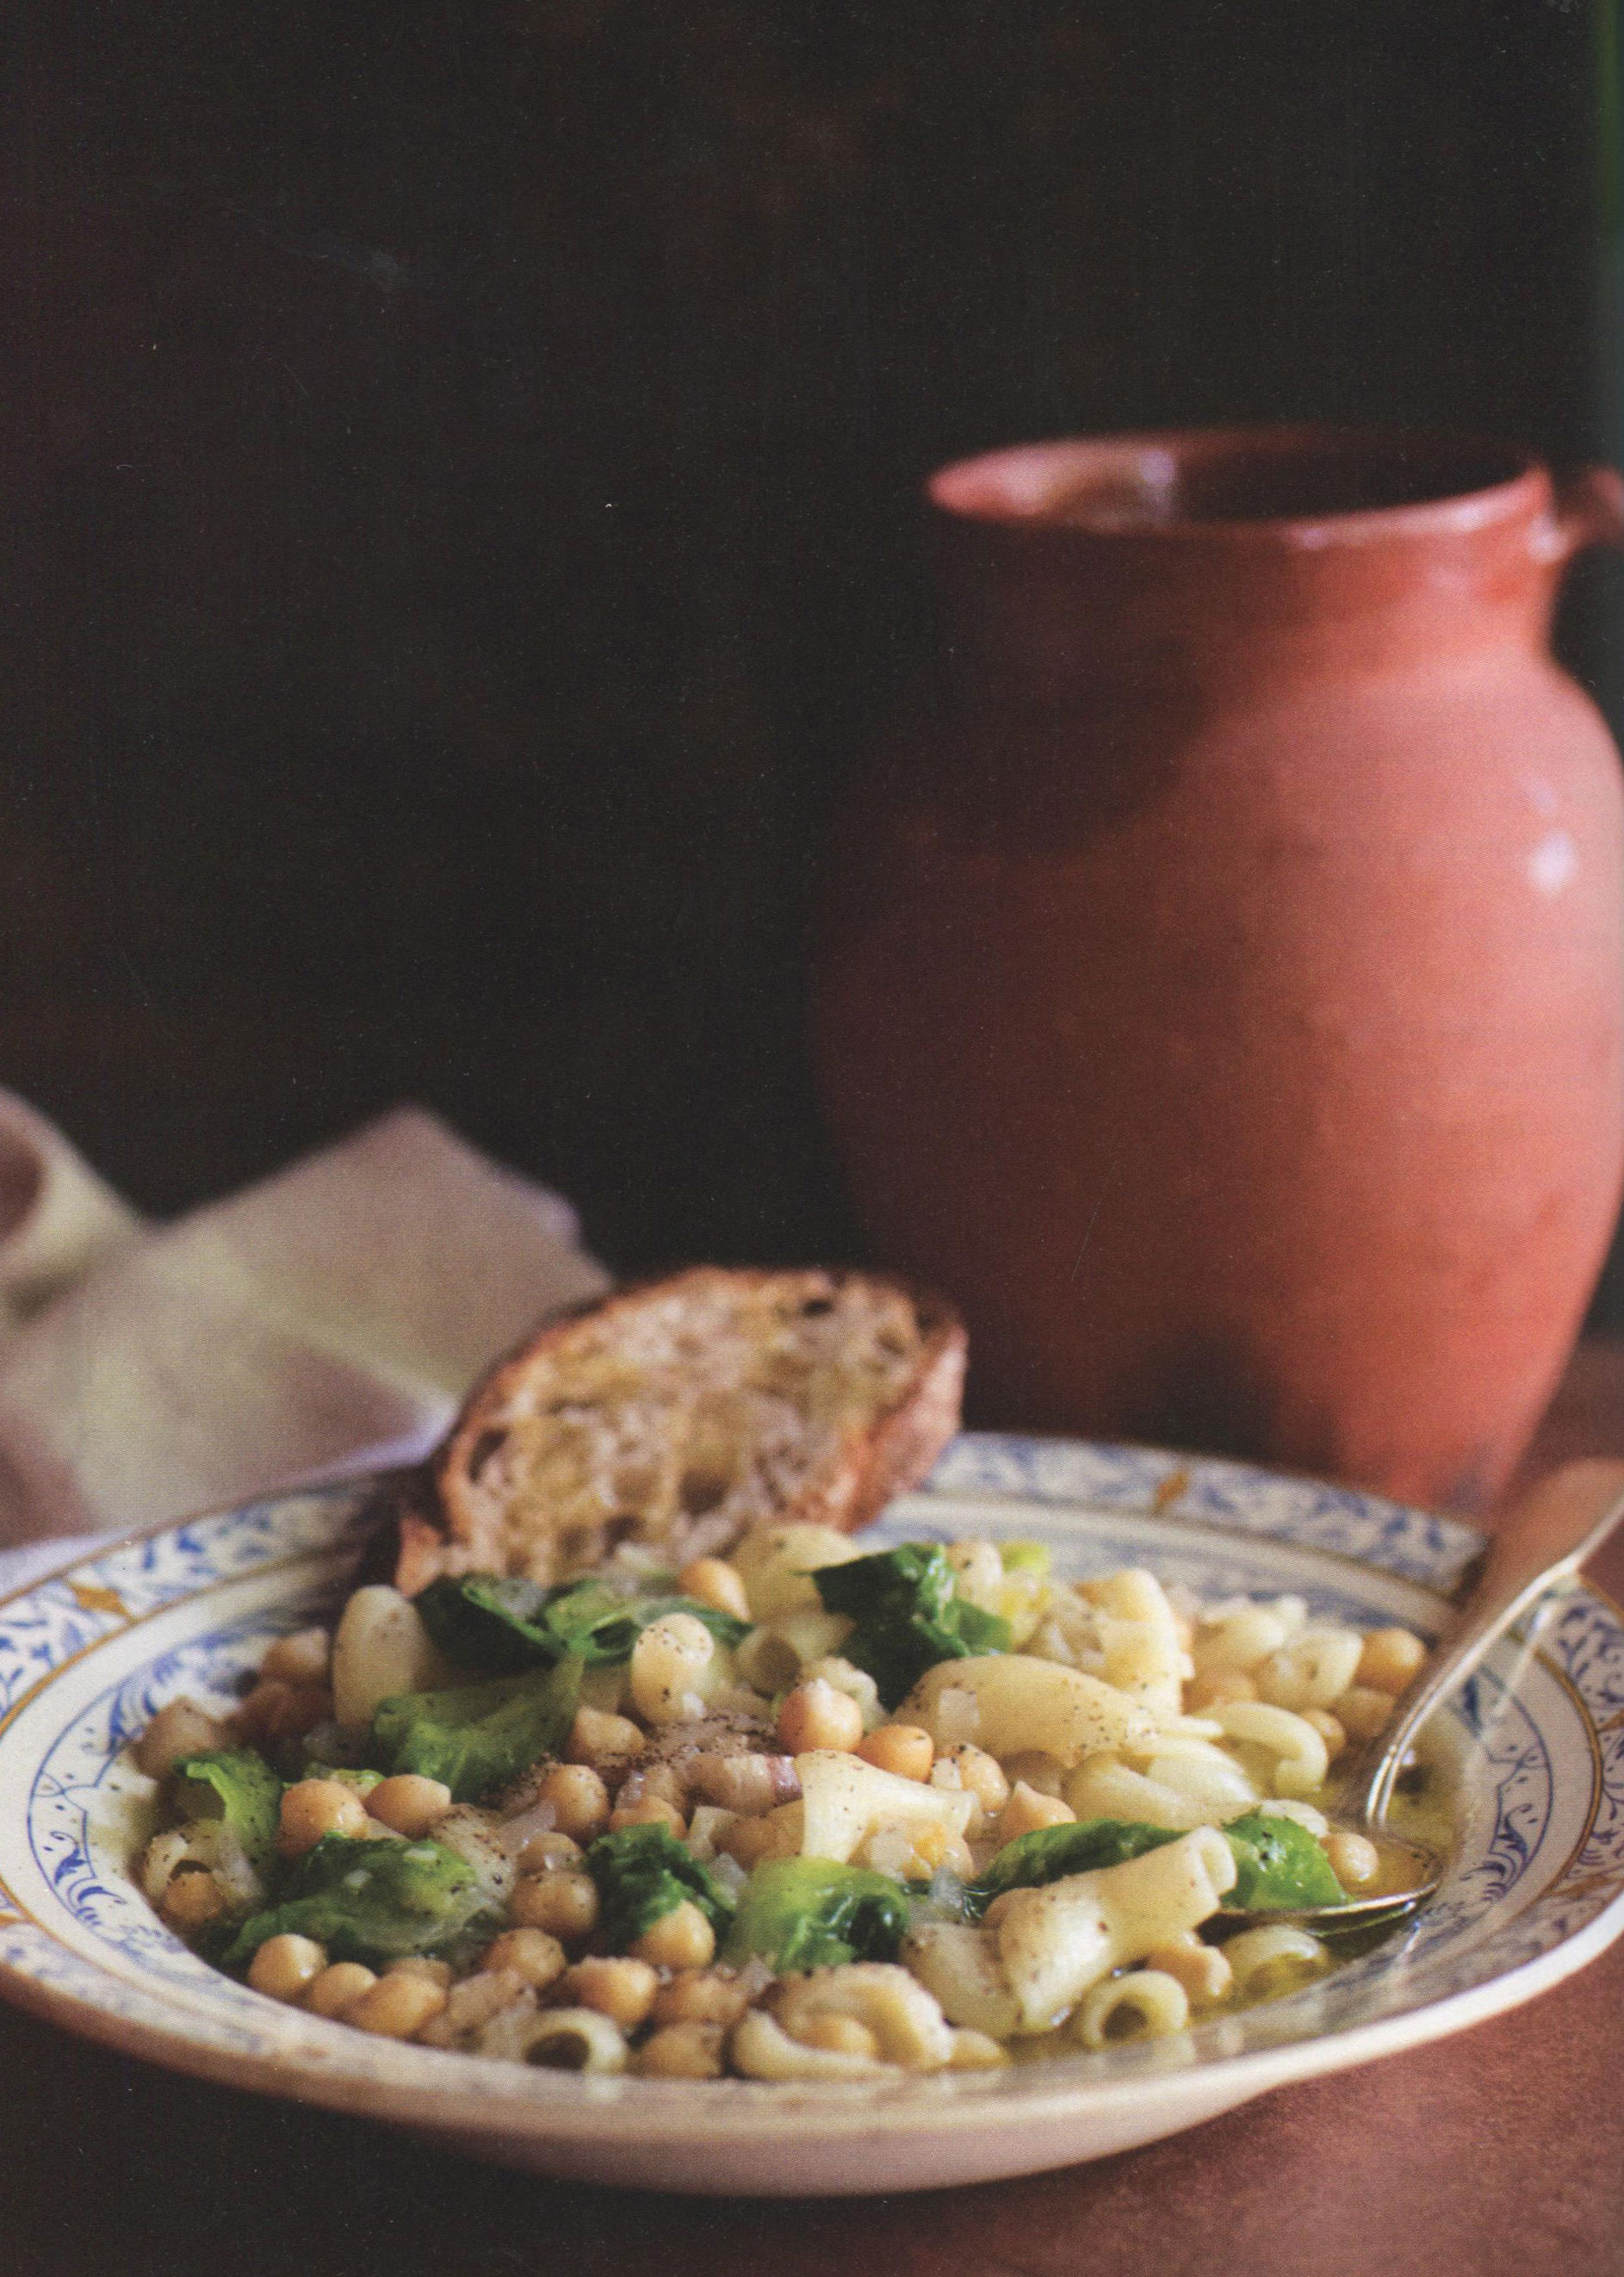 Pasta with Chick peas, Pancetta, Garlic and Escarole from The Four Seasons of Pasta